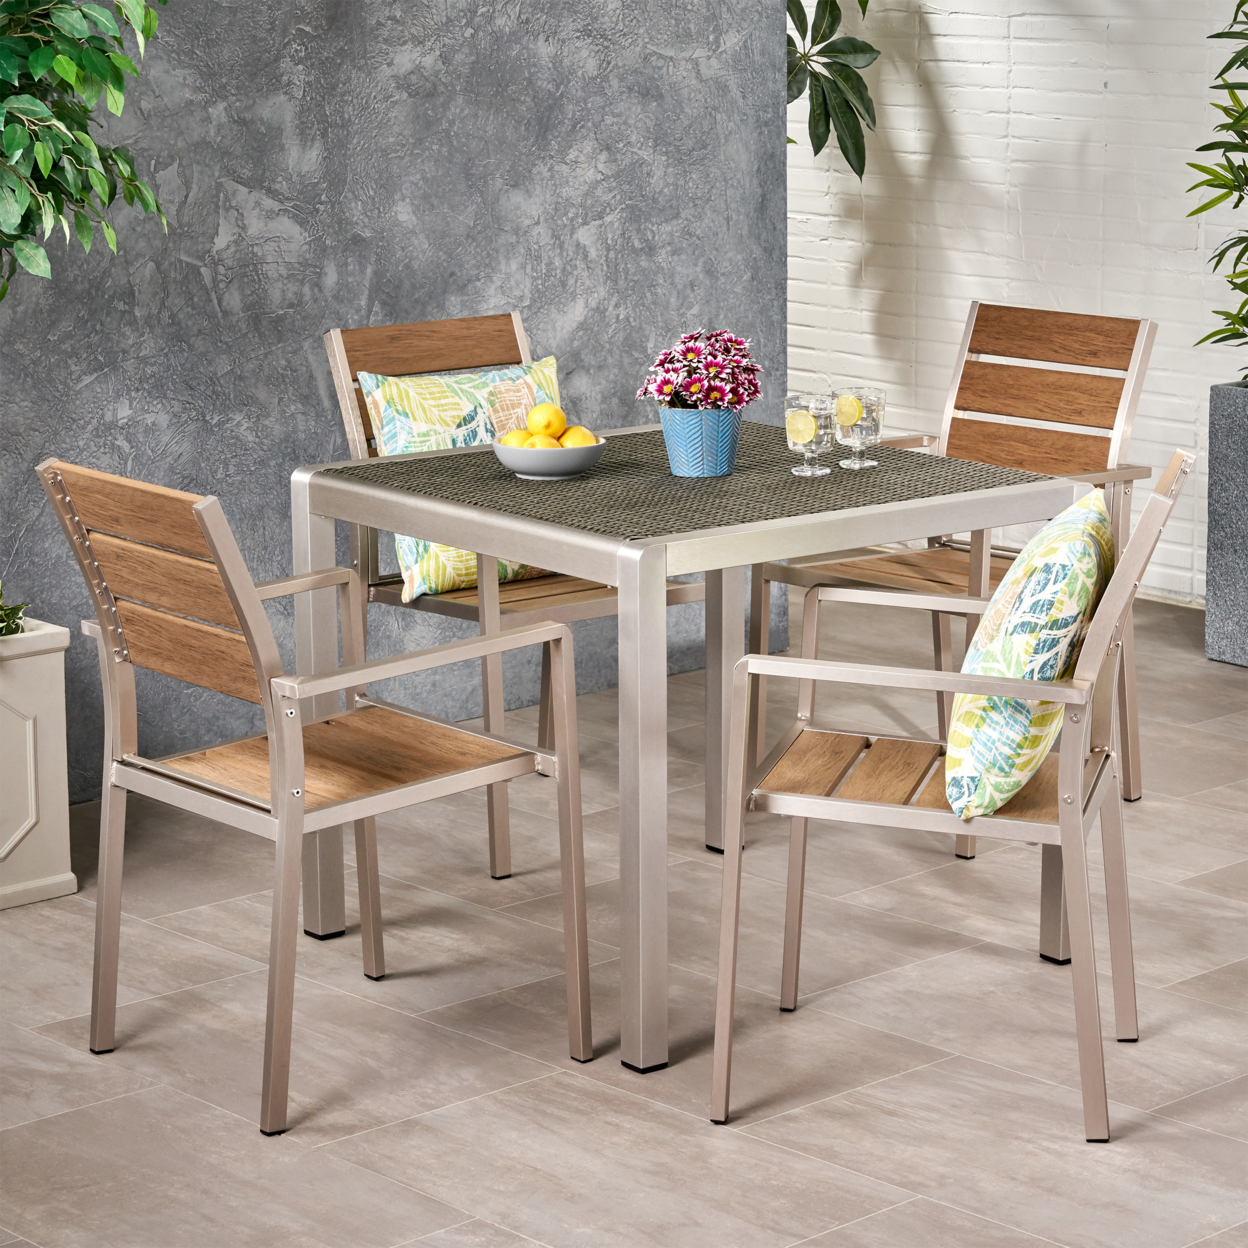 Jodie Outdoor Modern Aluminum 4 Seater Dining Set With Faux Wood Seats - Gray + Natural Finish + Silver